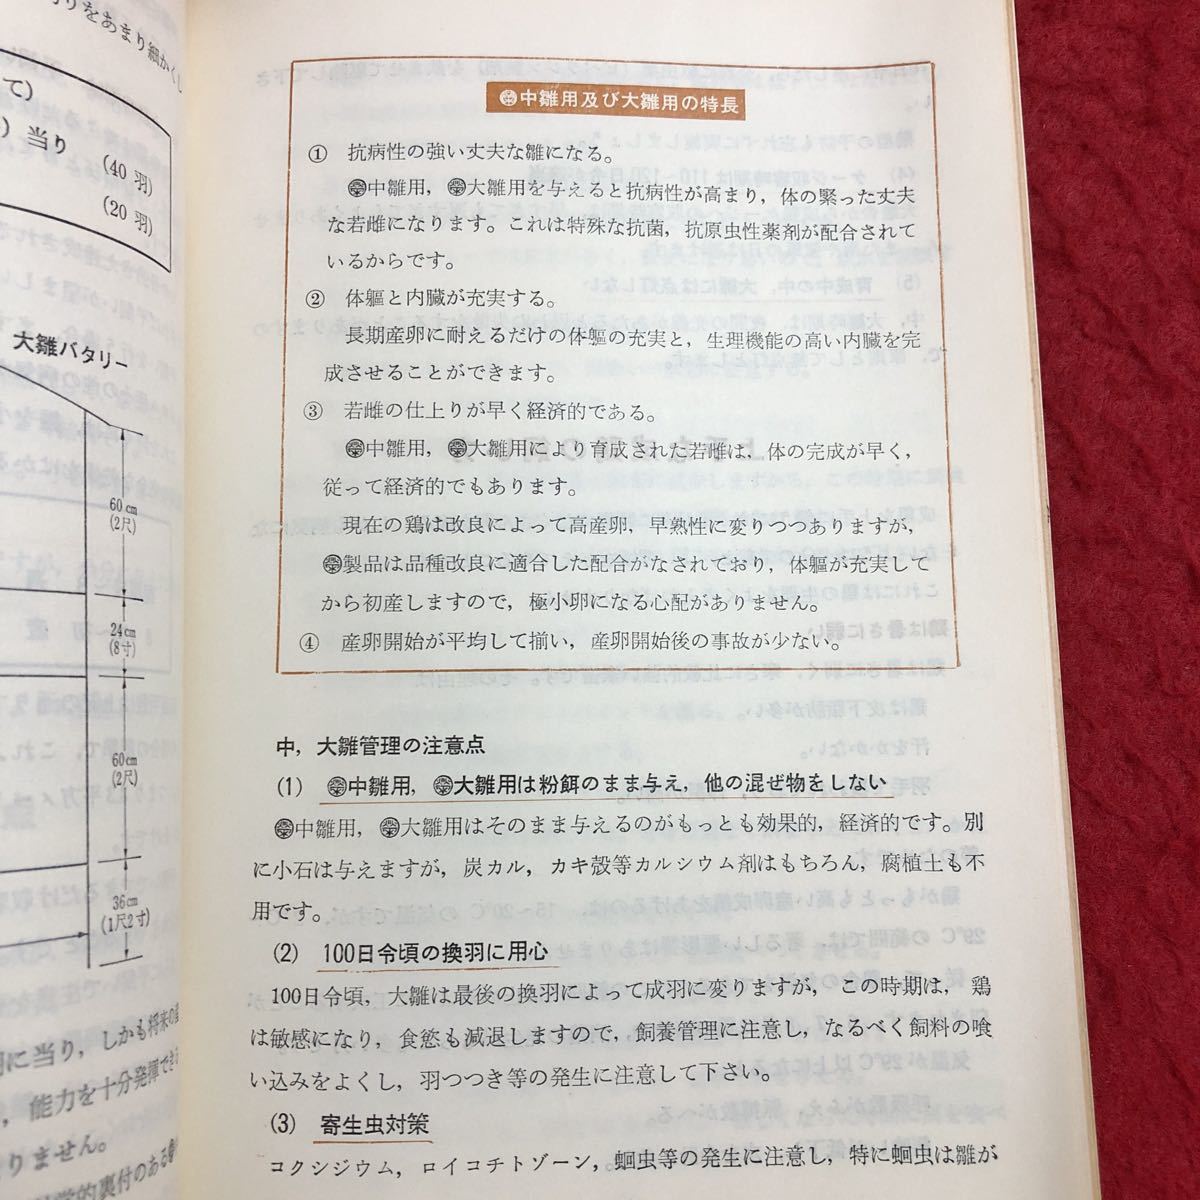 M6e-204 maru ei. chicken guide issue day unknown Japan agriculture production industry agriculture . agriculture chicken rearing materials cage apparatus chicken . sick . measures company commodity hina shipping 